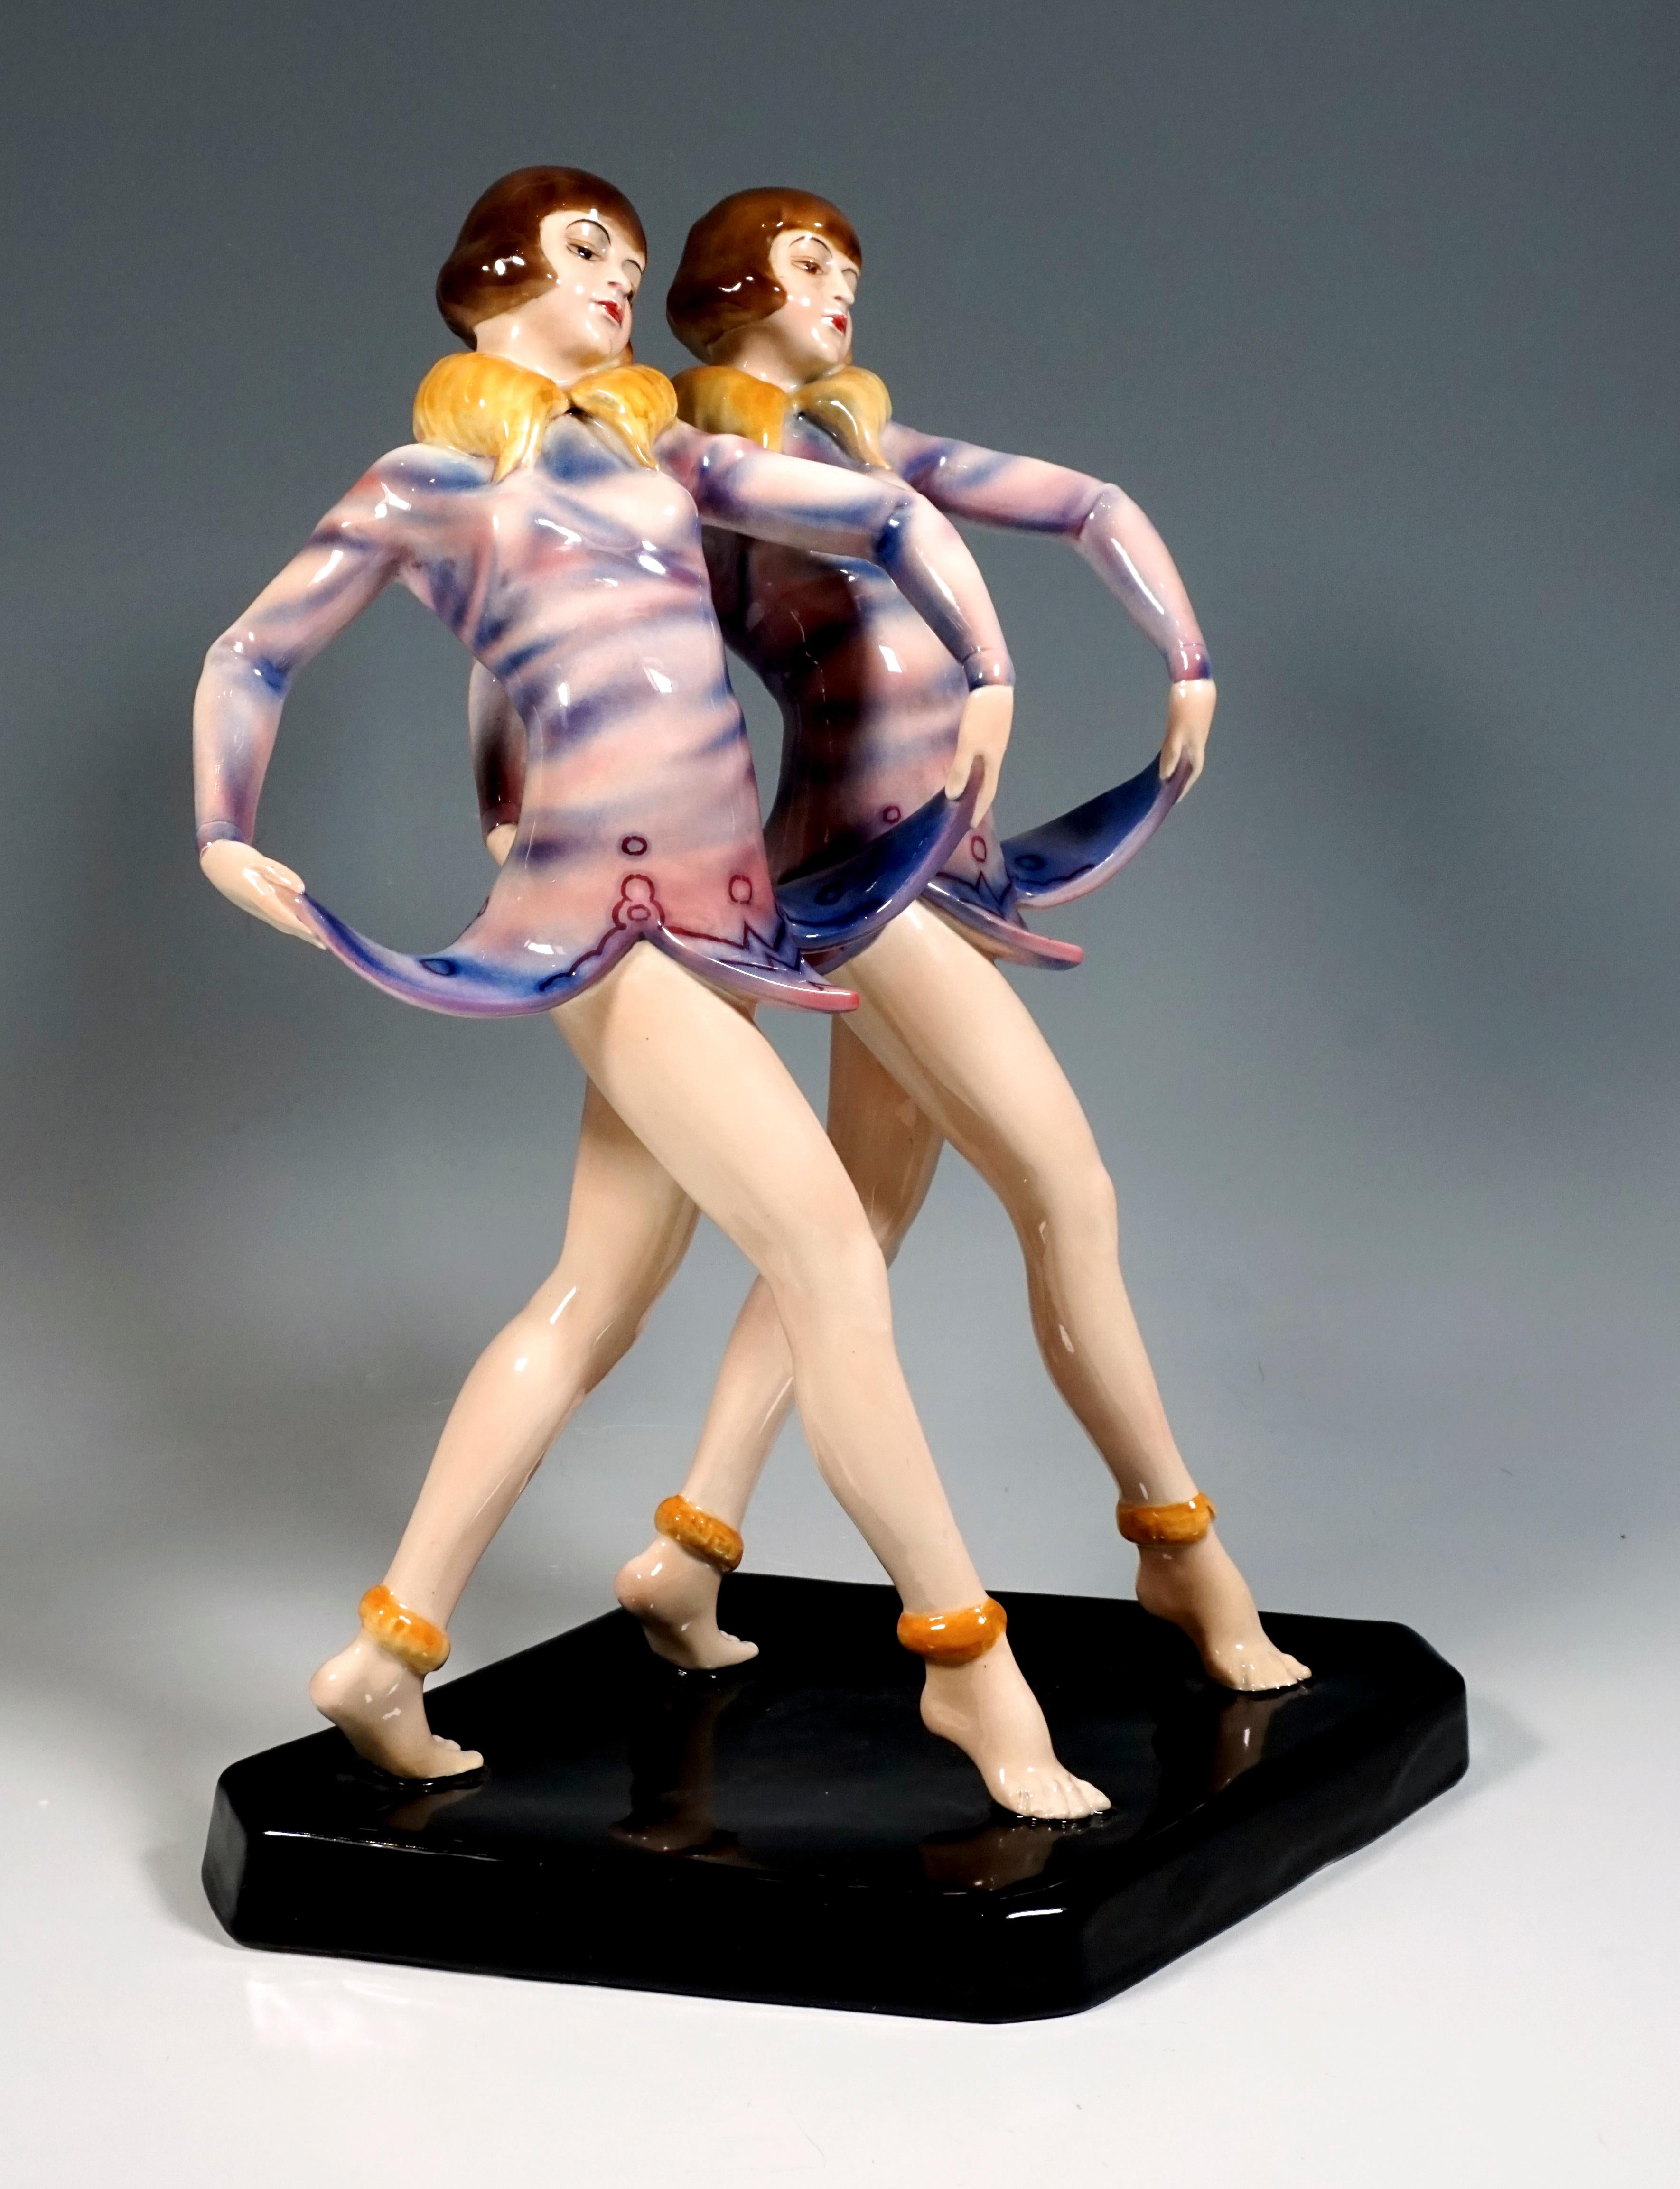 Most Remarkable Rarest Goldscheider Art Deco Figurine Group of the 1930s:
Two standing young revue twin dancers with pageboy hairstyle, taking a step forward. At the same time, they lift the bellflower-shaped hem of their short purple dress with a